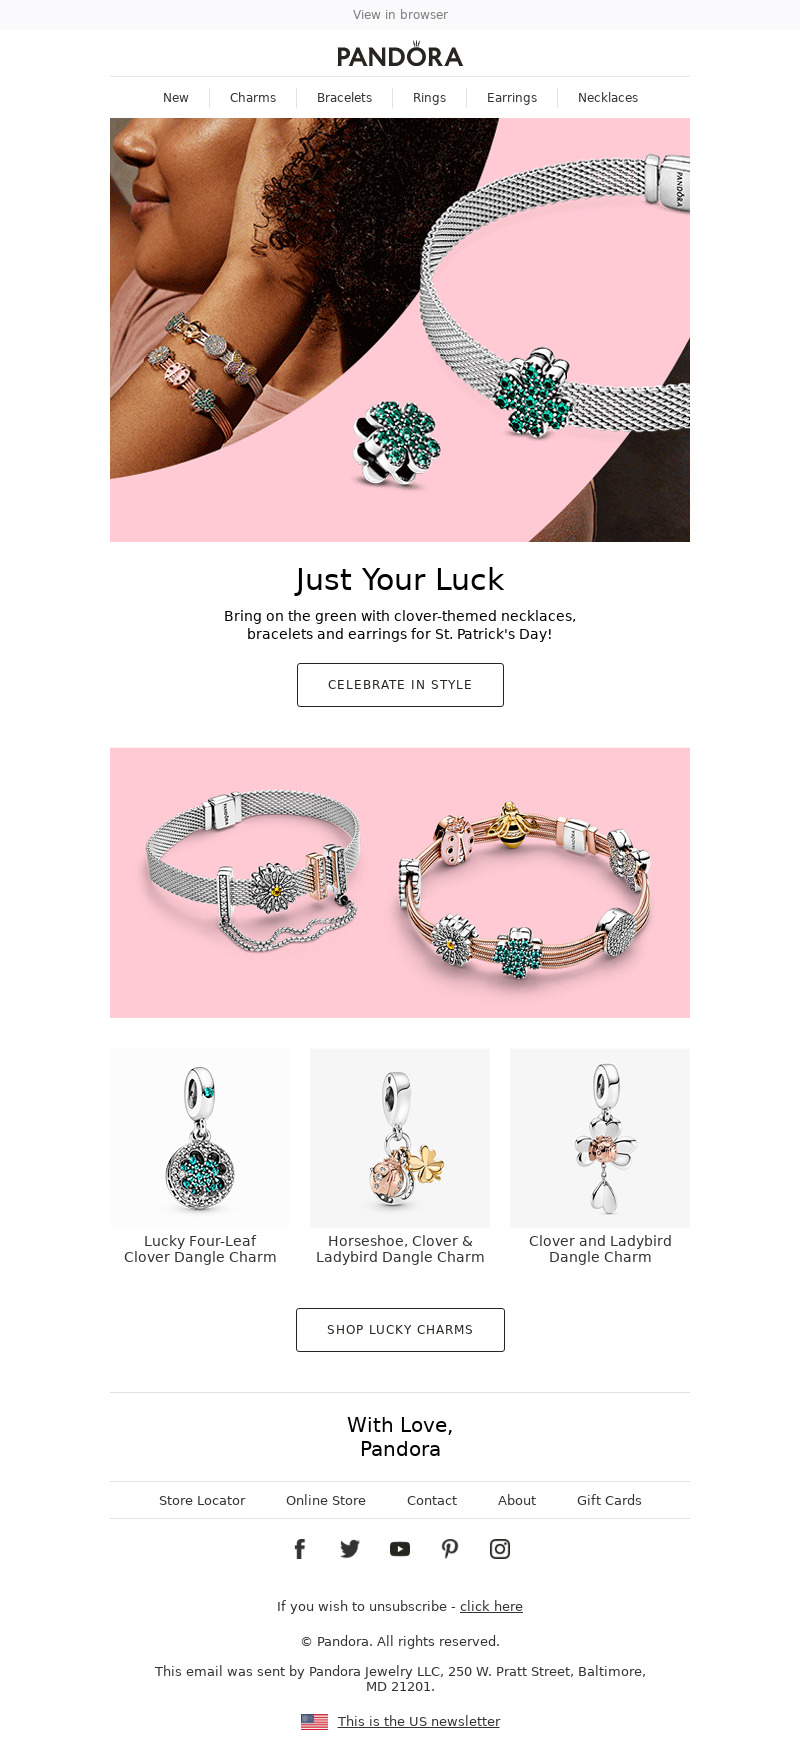 Pandora St. Patrick's Day-themed jewelry collection email promotion.